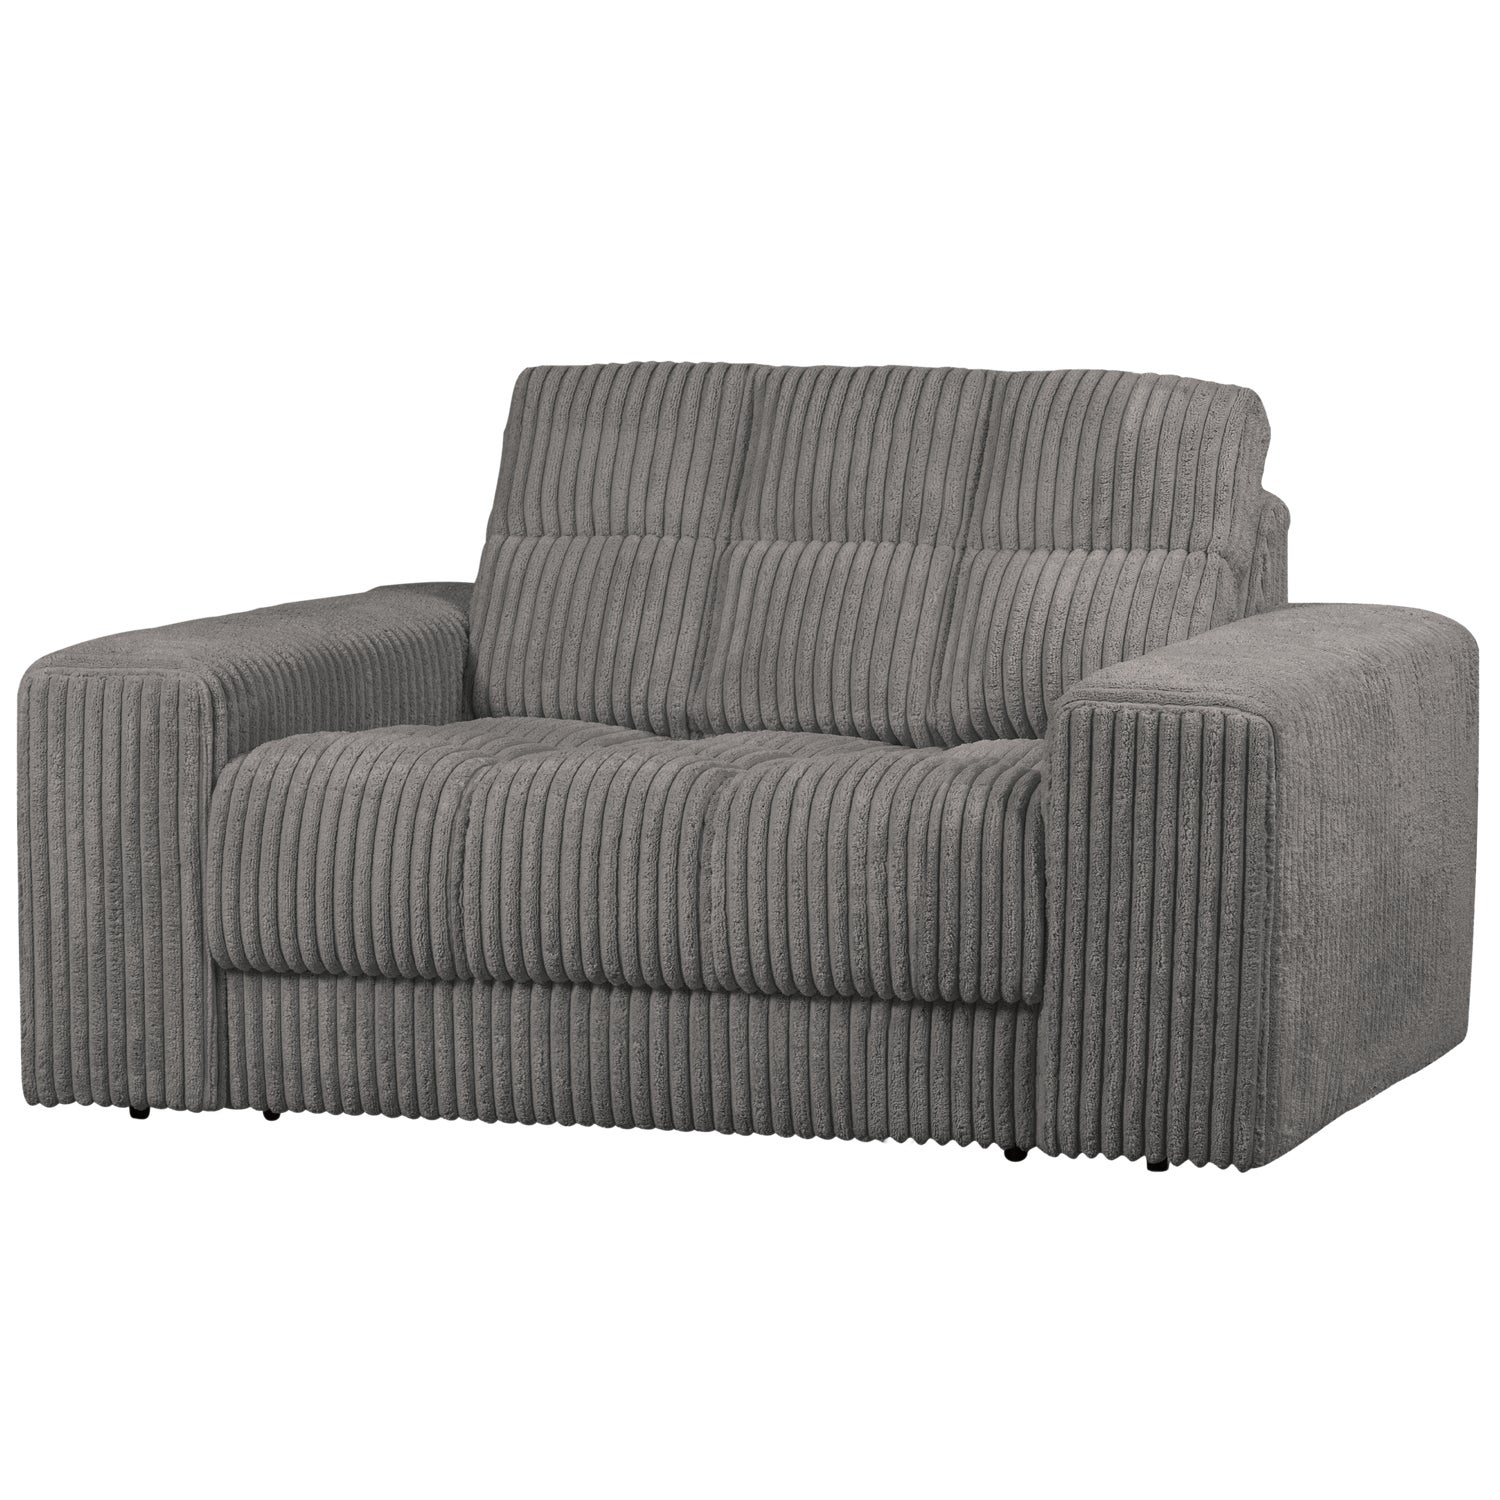 379006-RE-02_VS_WE_Second_date_loveseat_grove_ribstof_terrazzo_SA.png?auto=webp&format=png&width=1500&height=1500